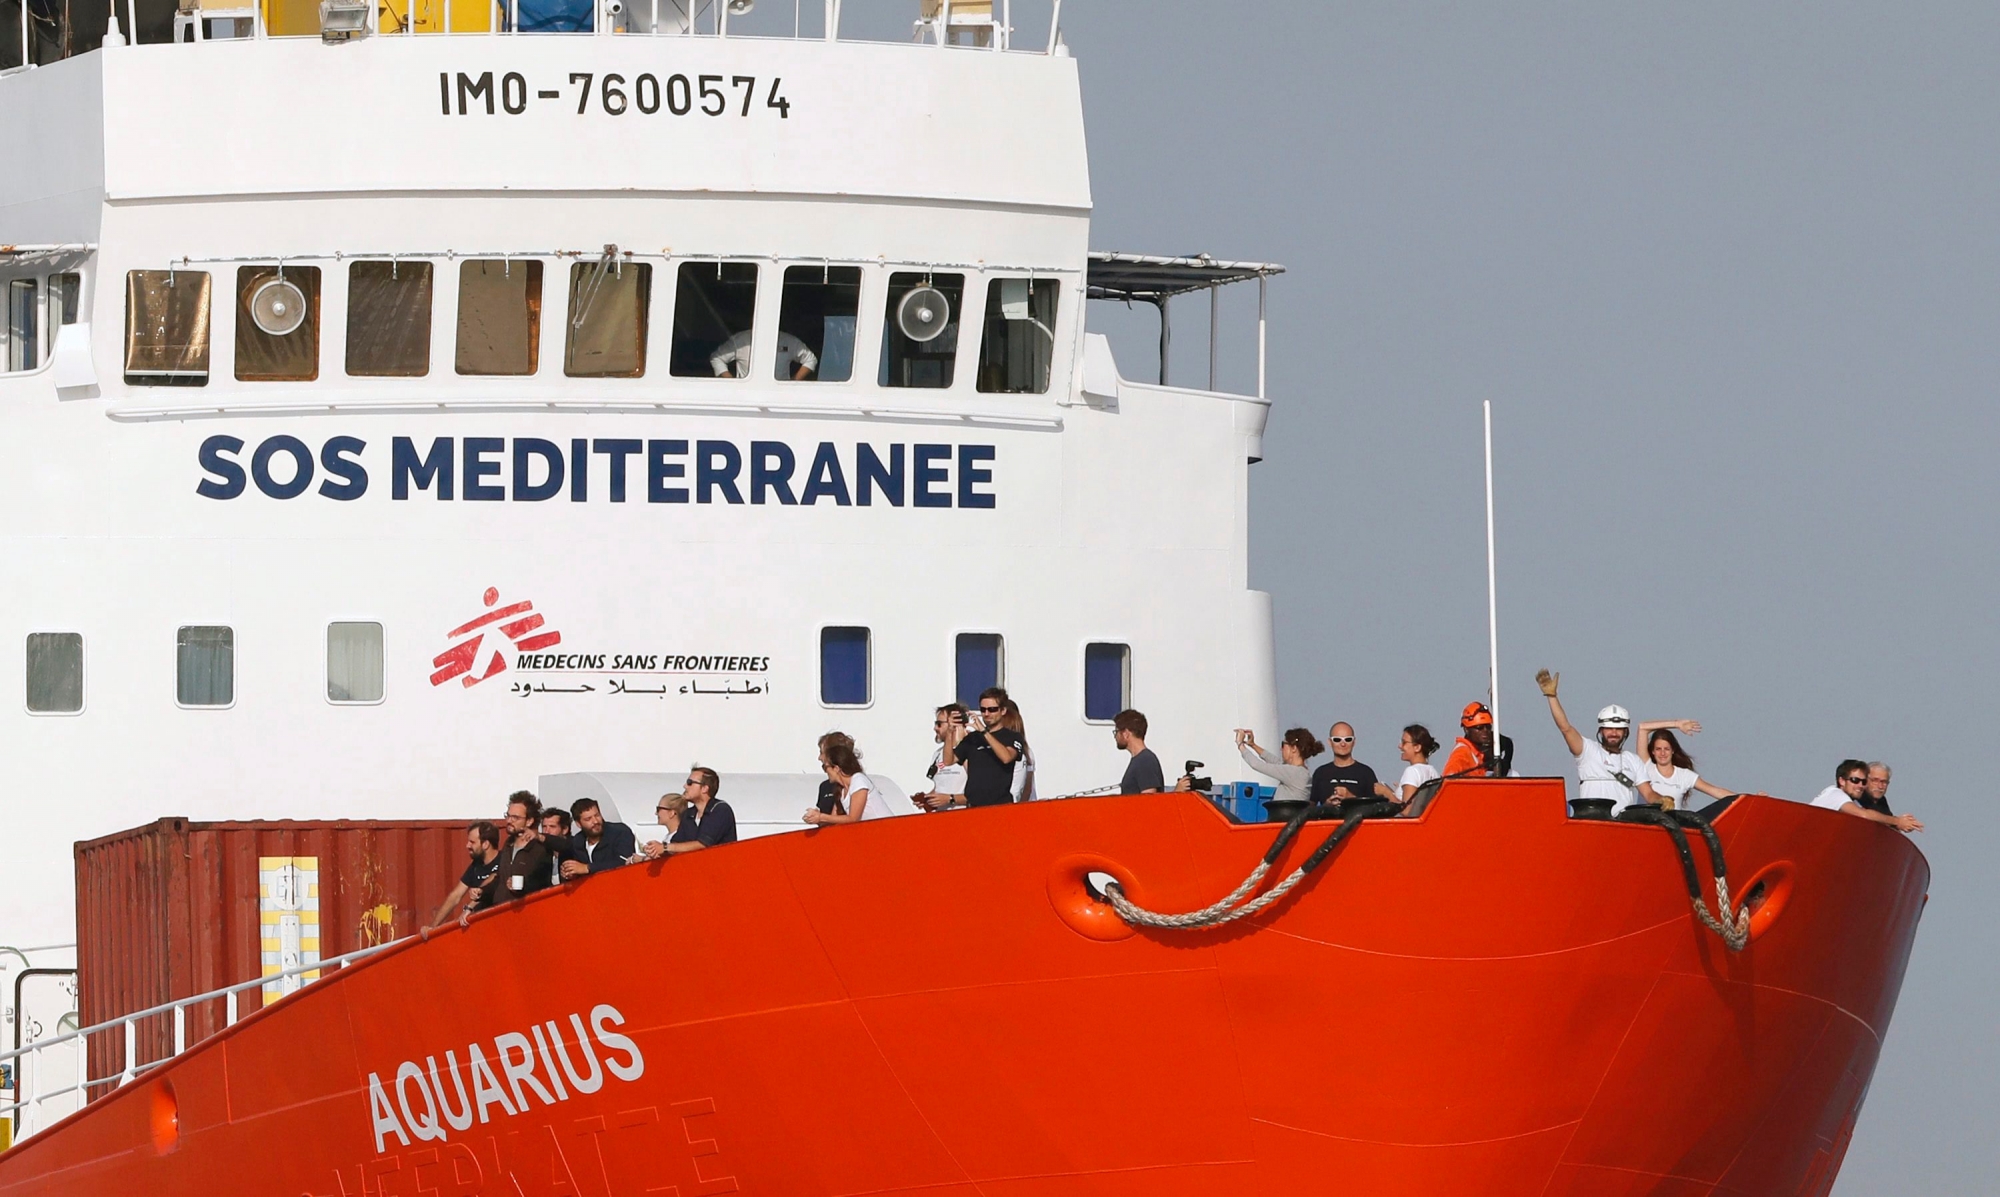 ARICHIV - ZUR SHORTLIST ZUM SACHAROW-MENSCHENRECHTSPREIS STELLEN WIR IHNEN FOLGENDES BILDMATERIAL ZUR VERFUEGUNG - epa07042833 (FILE) - Crew members of the search and rescue vessel 'Aquarius' of NGO 'SOS Mediterranee' wave from the ship's bow as the vessel arrives in the port of Marseille, France, 29 June 2018 (reissued 24 September 2018). According to media reports on 24 September 2018, the Panama authorities have begun procedures to revoke the registration of the Aquarius, the last migrant rescue ship operating in the central Mediterranean. The vessel which is currently at sea will have to remove its Panama maritime flag when next she docks and cannot set sail without a new one. The operators of the vessel have accused Panama of bowing to pressure from the Italian government.  EPA/GUILLAUME HORCAJUELO SACHAROW MENSCHENRECHTSPREIS SHORTLIST